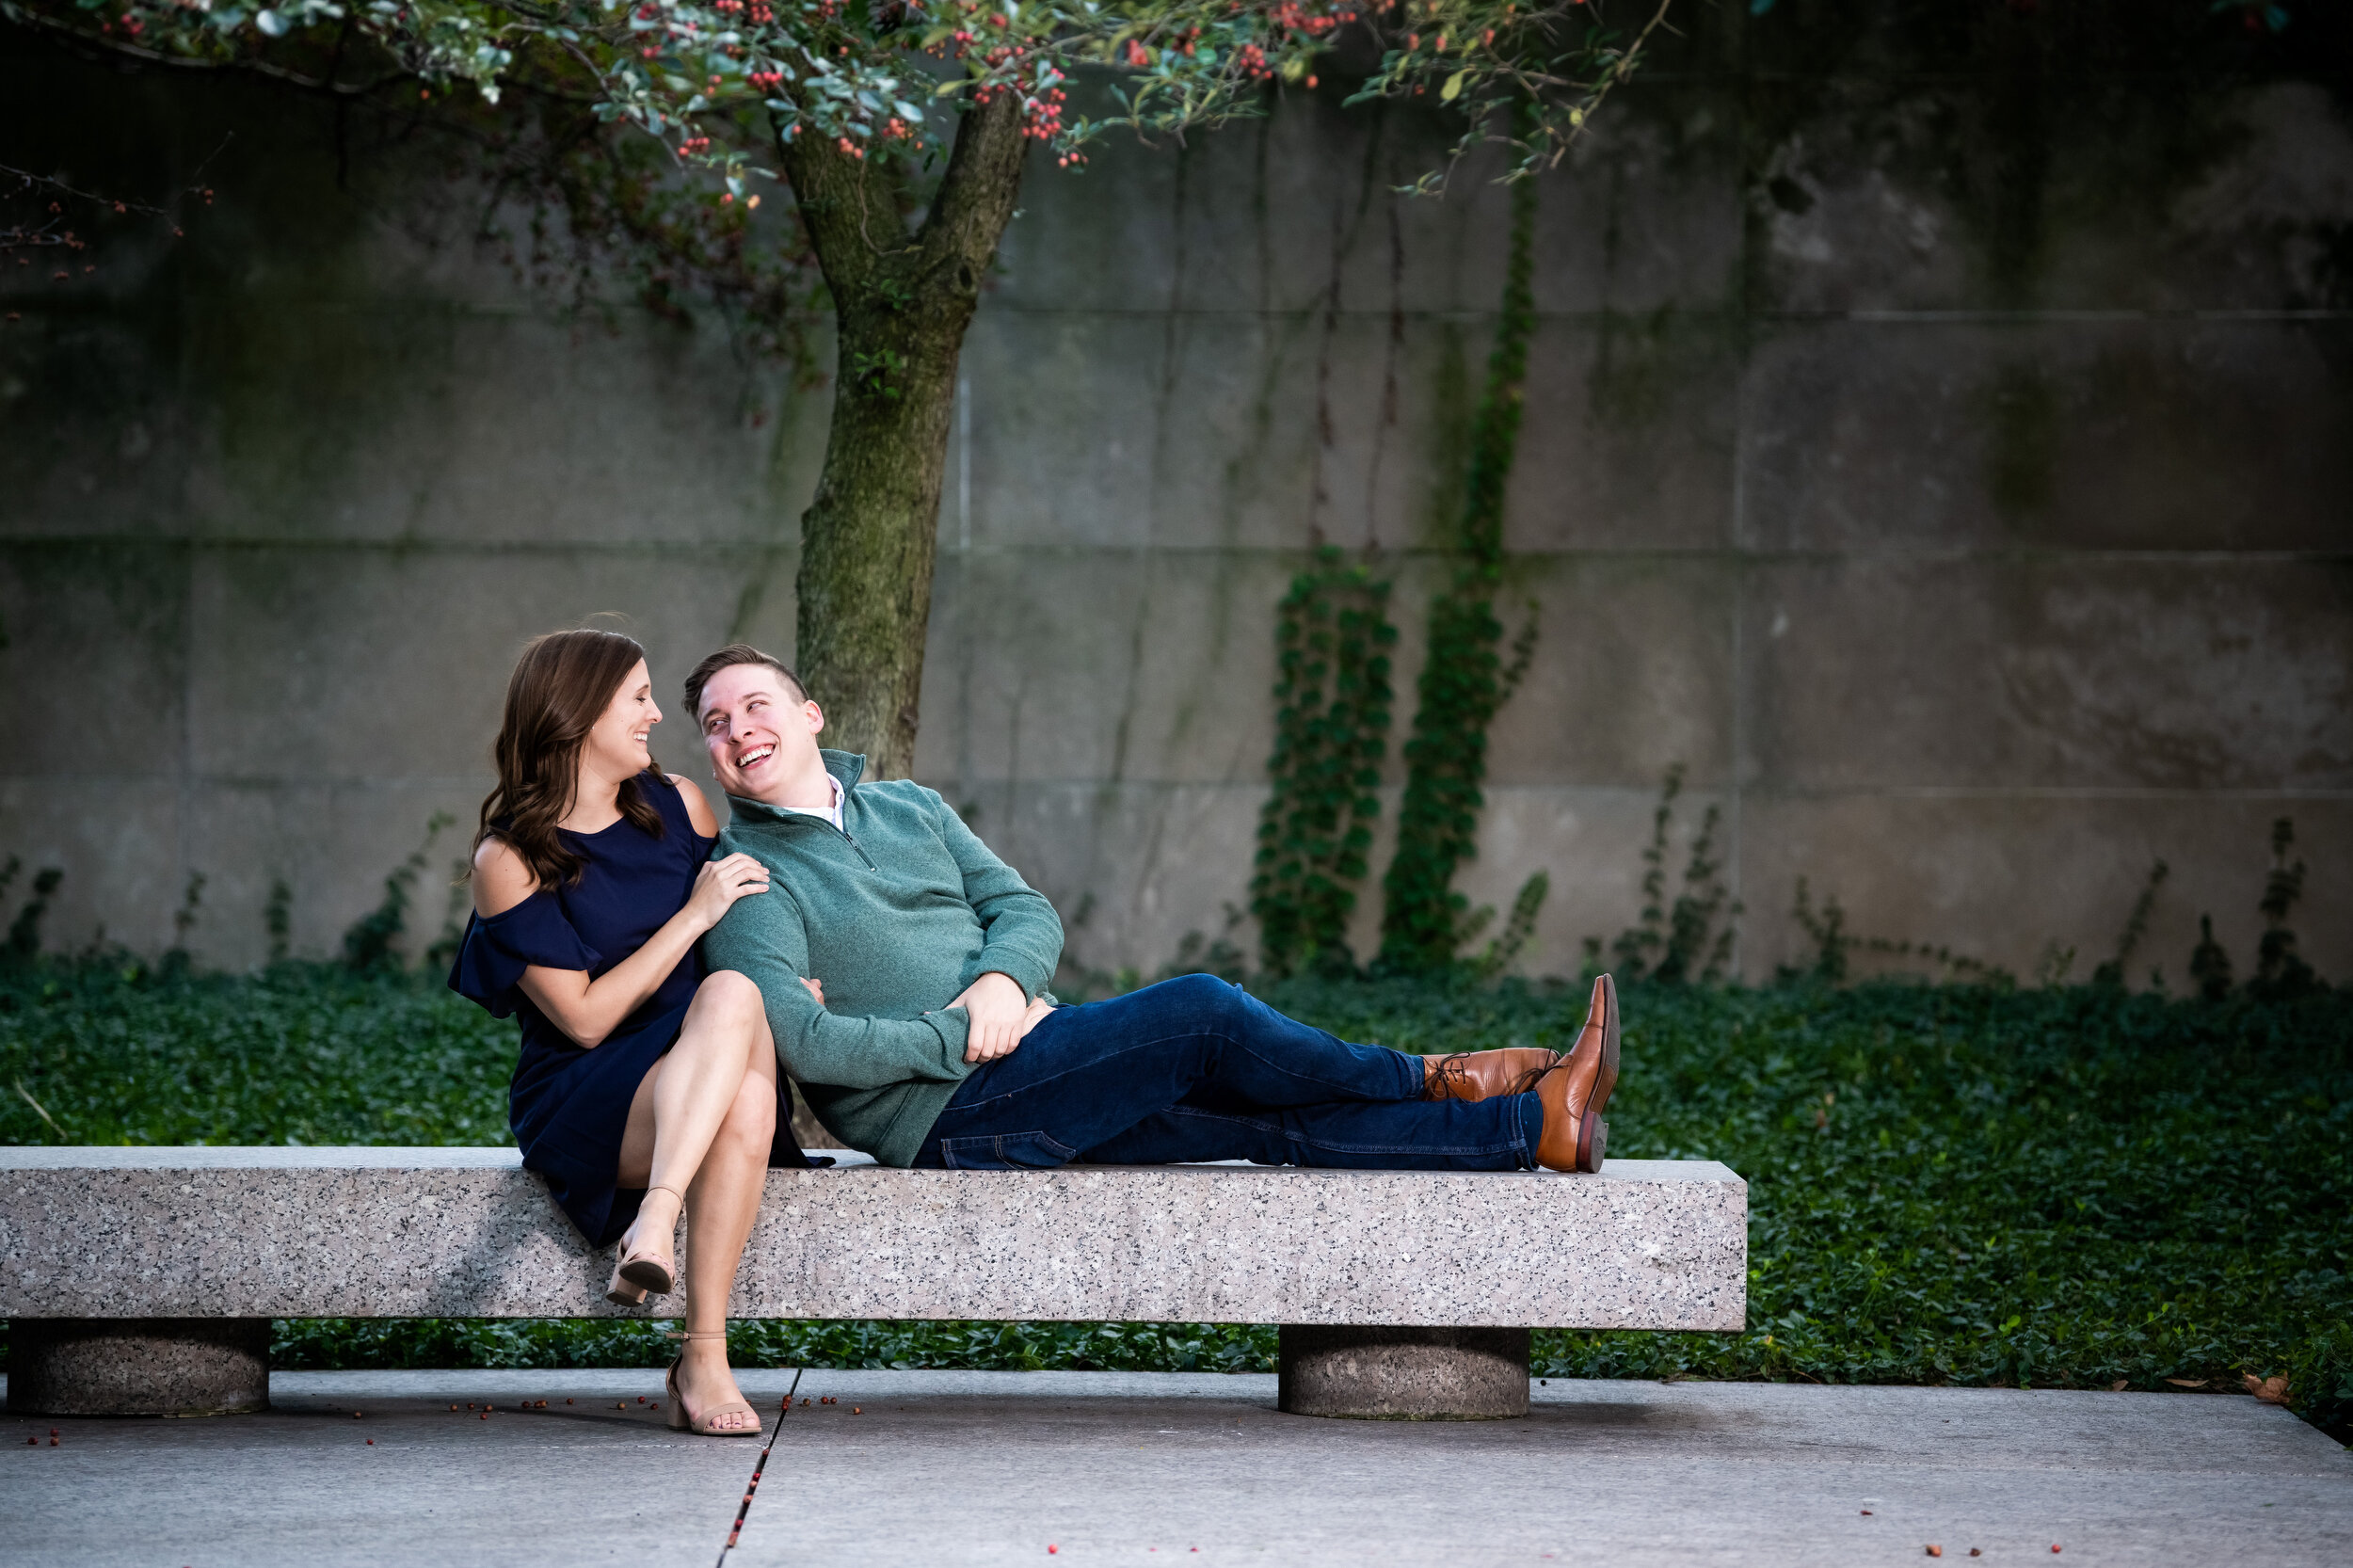 Fun creative engagement session at the Art Institute of Chicago.  